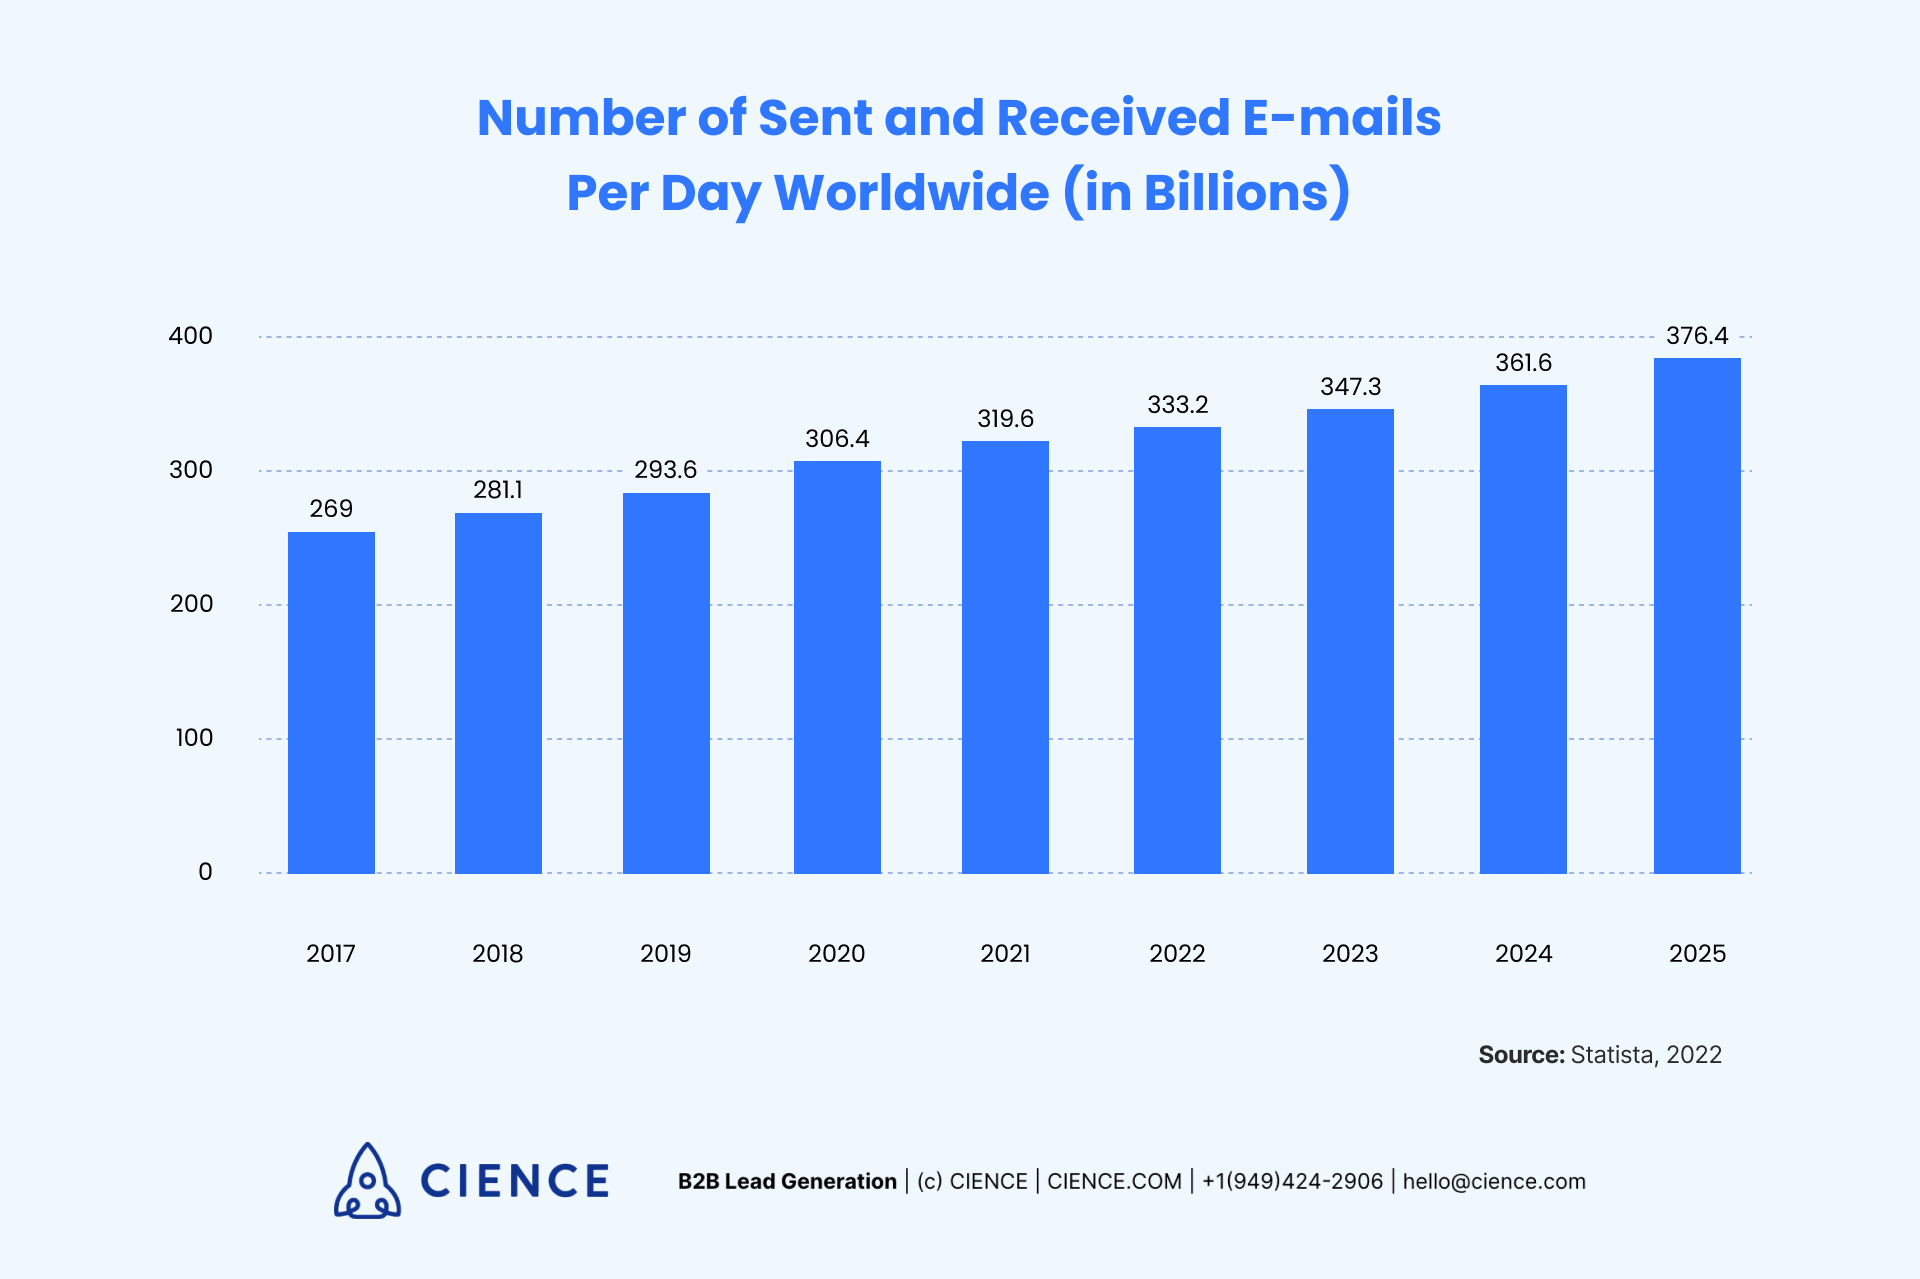 Number of sent and received emails per day - Worldwide Statistics